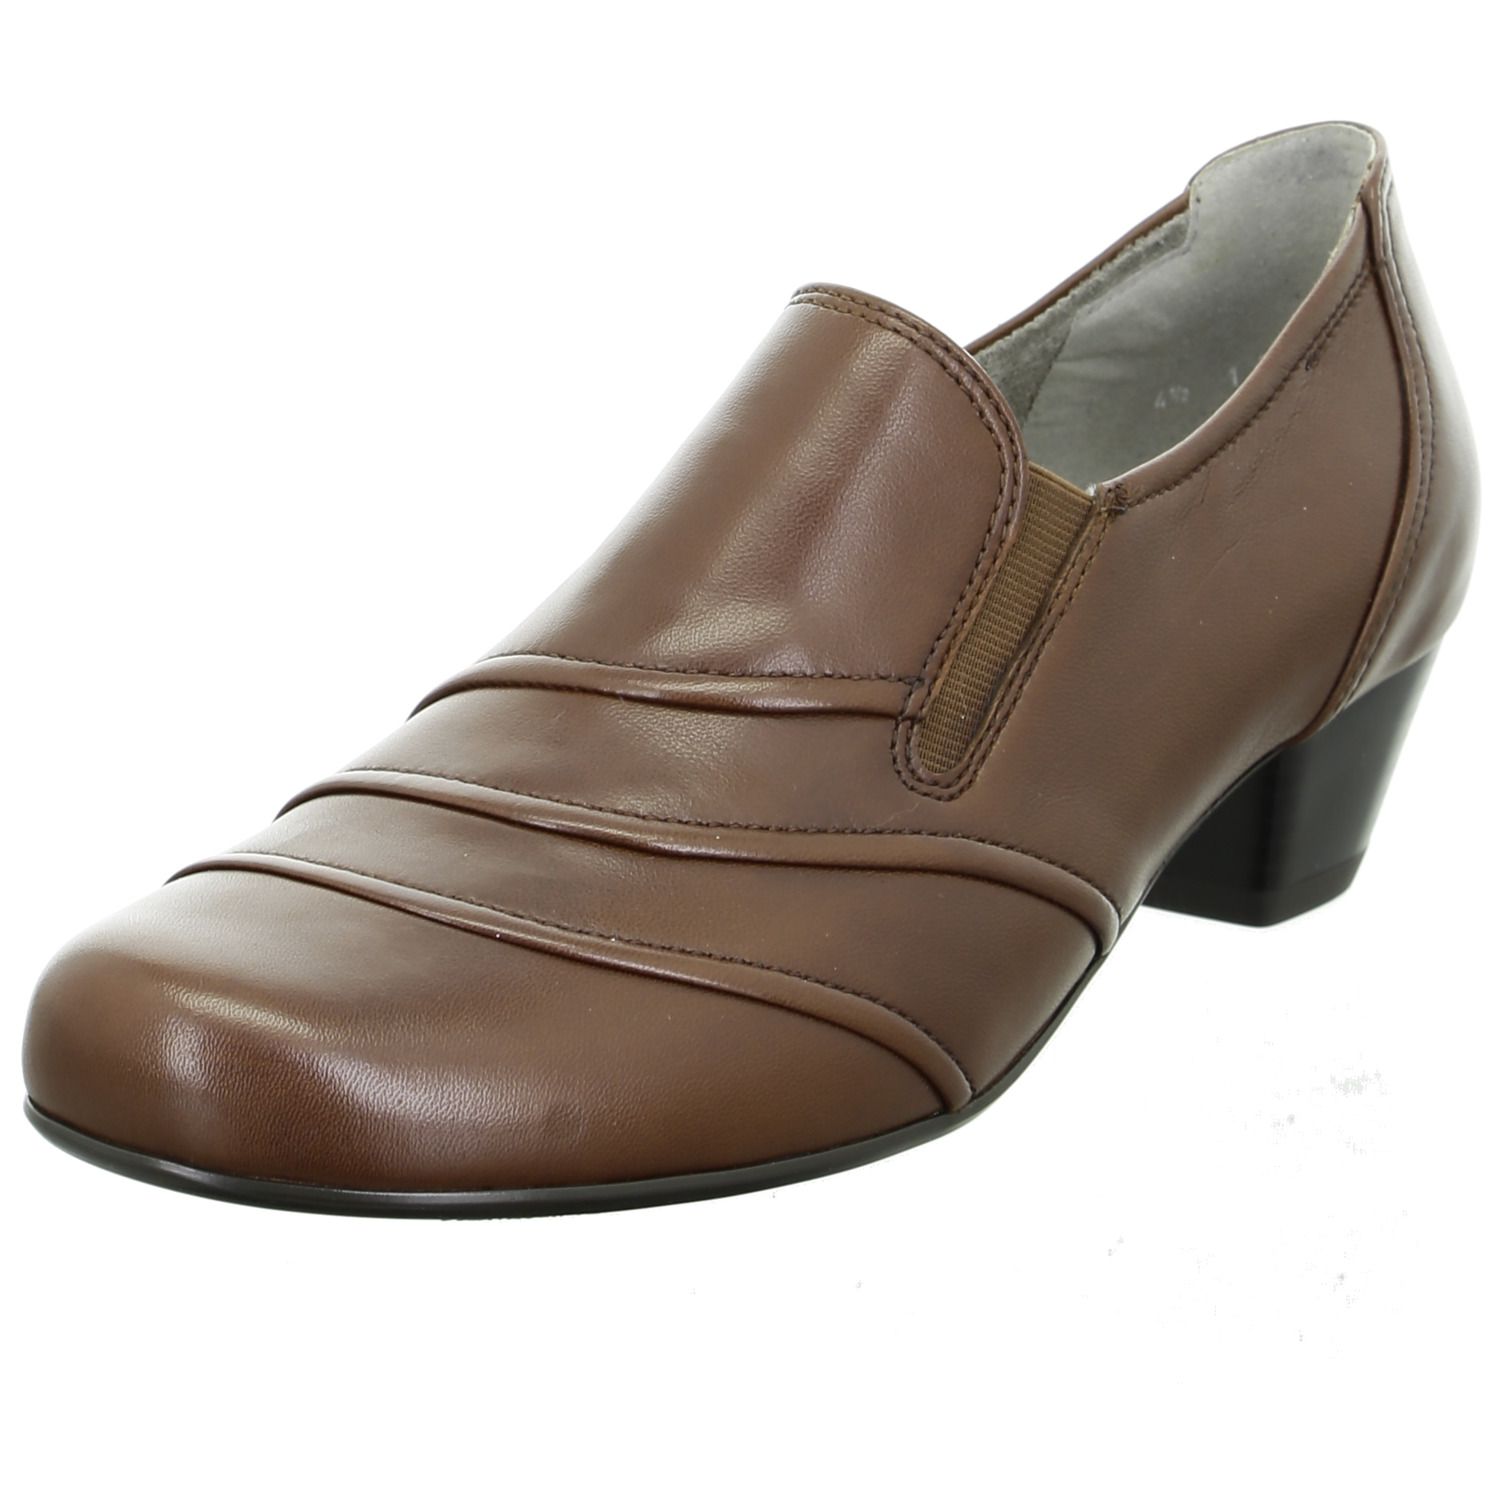 Ara Pumps - Brown smooth leather